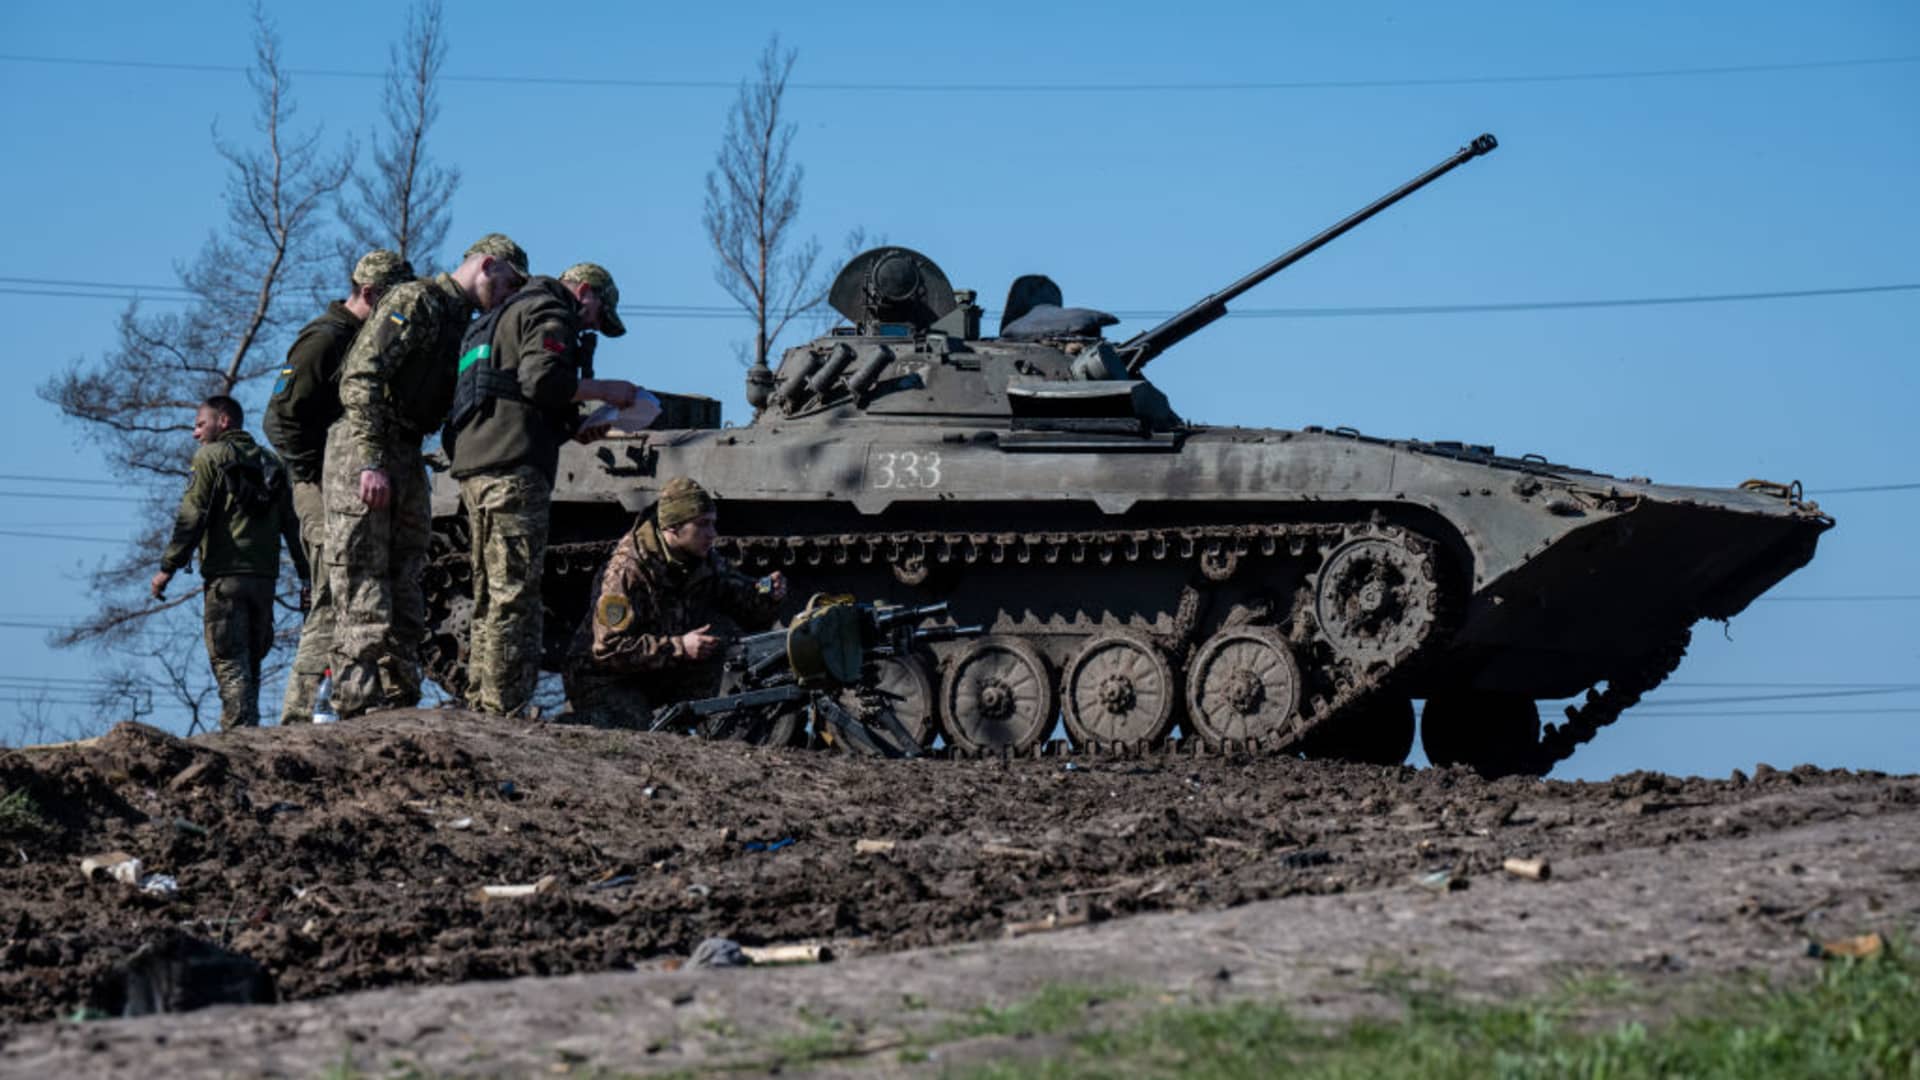 Ukrainian armored vehicles maneuver and fire their 30mm guns, as Ukrainian Armed Forces brigades train for a critical and imminent spring counteroffensive against Russian troops, which invaded 14 months earlier, in the Donbas region, Ukraine, on April 26, 2023.